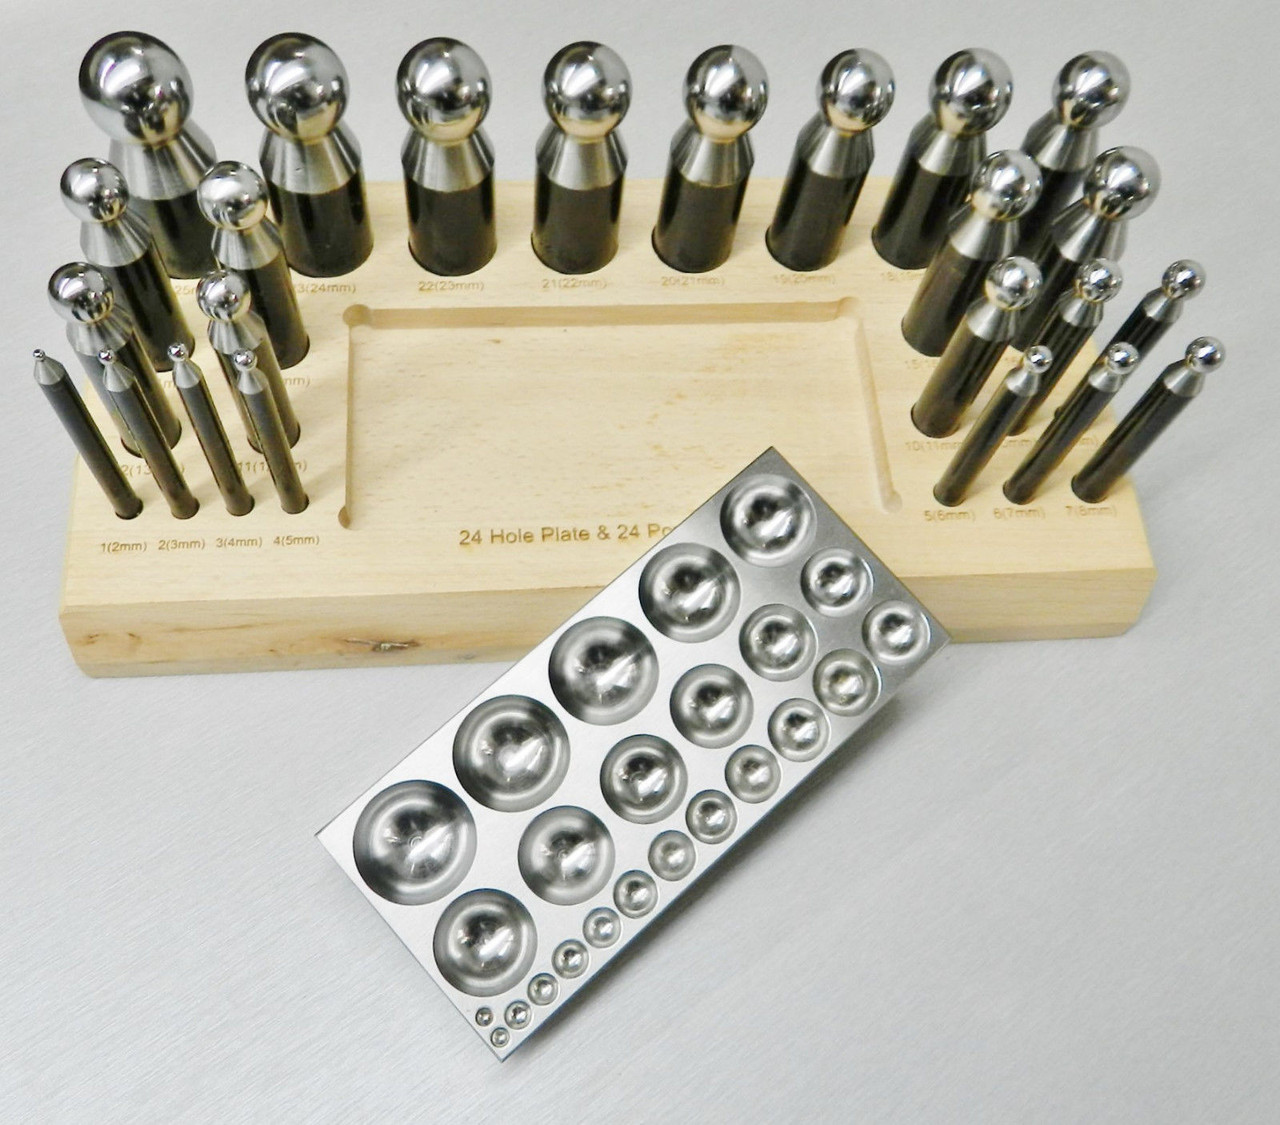 Dapping Block & Punches 24pcs Set Steel Forming for Jewelry Repousse Silversmith